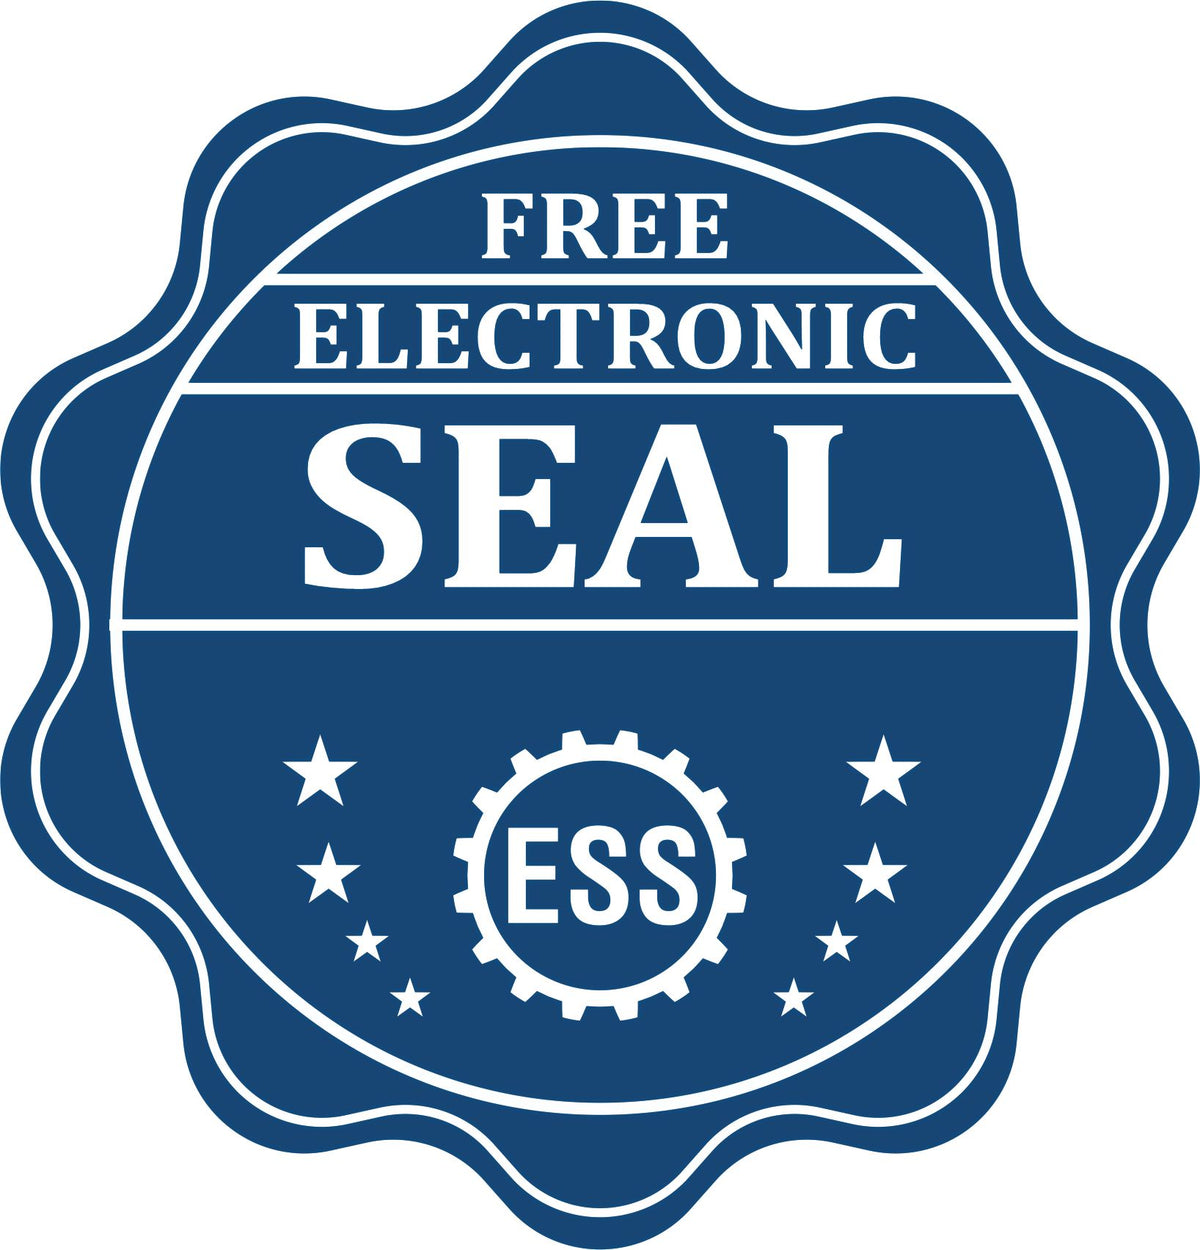 A badge showing a free electronic seal for the PSI Nevada Notary Stamp with stars and the ESS gear on the emblem.